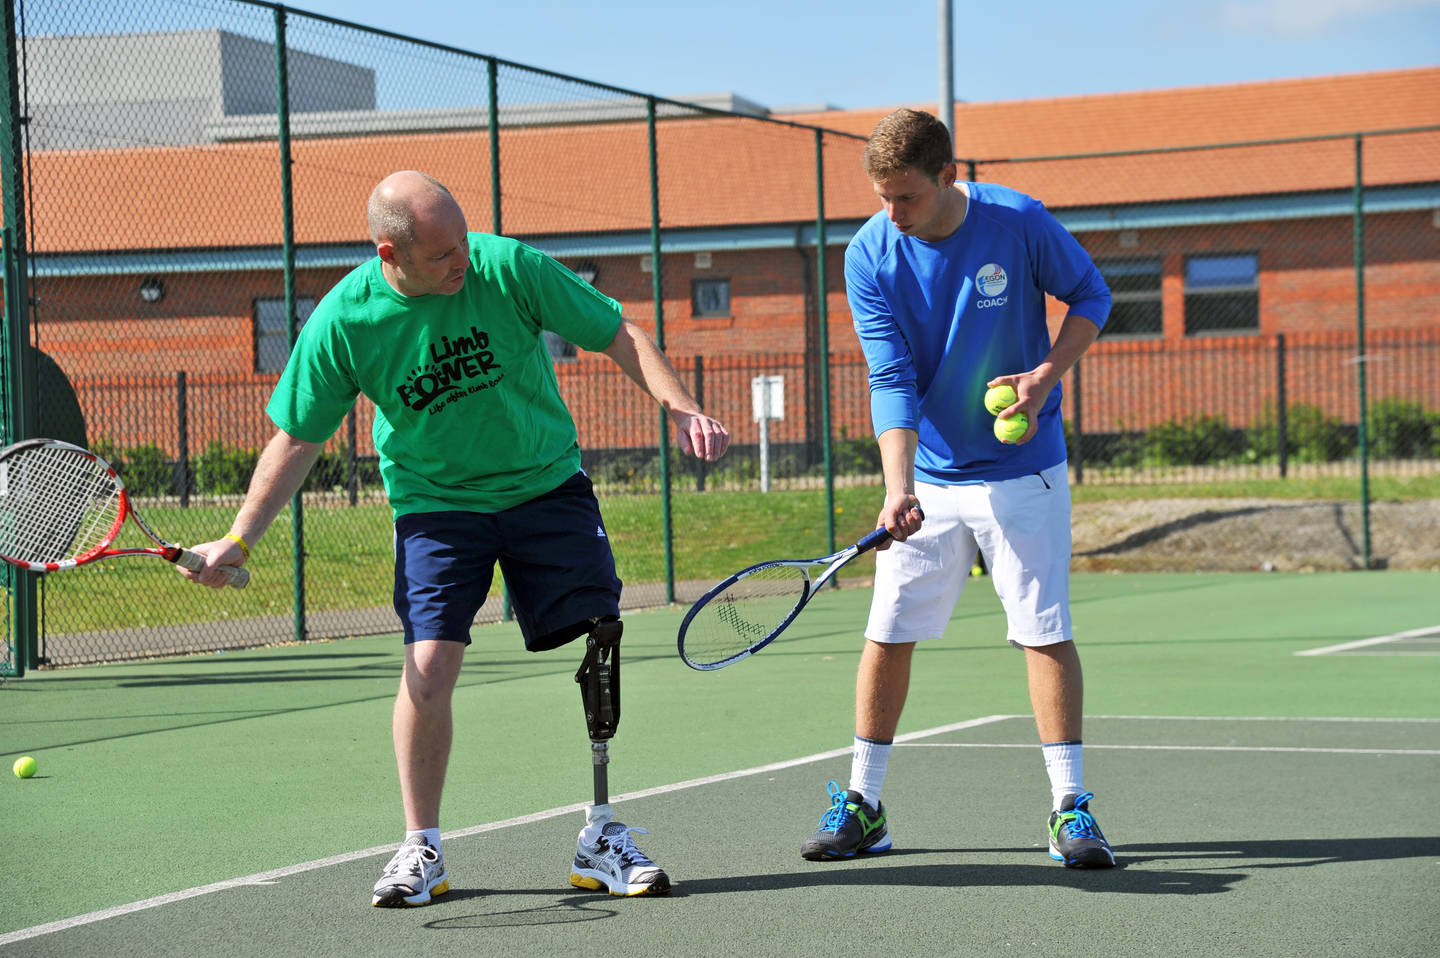 Man with coach playing tennis